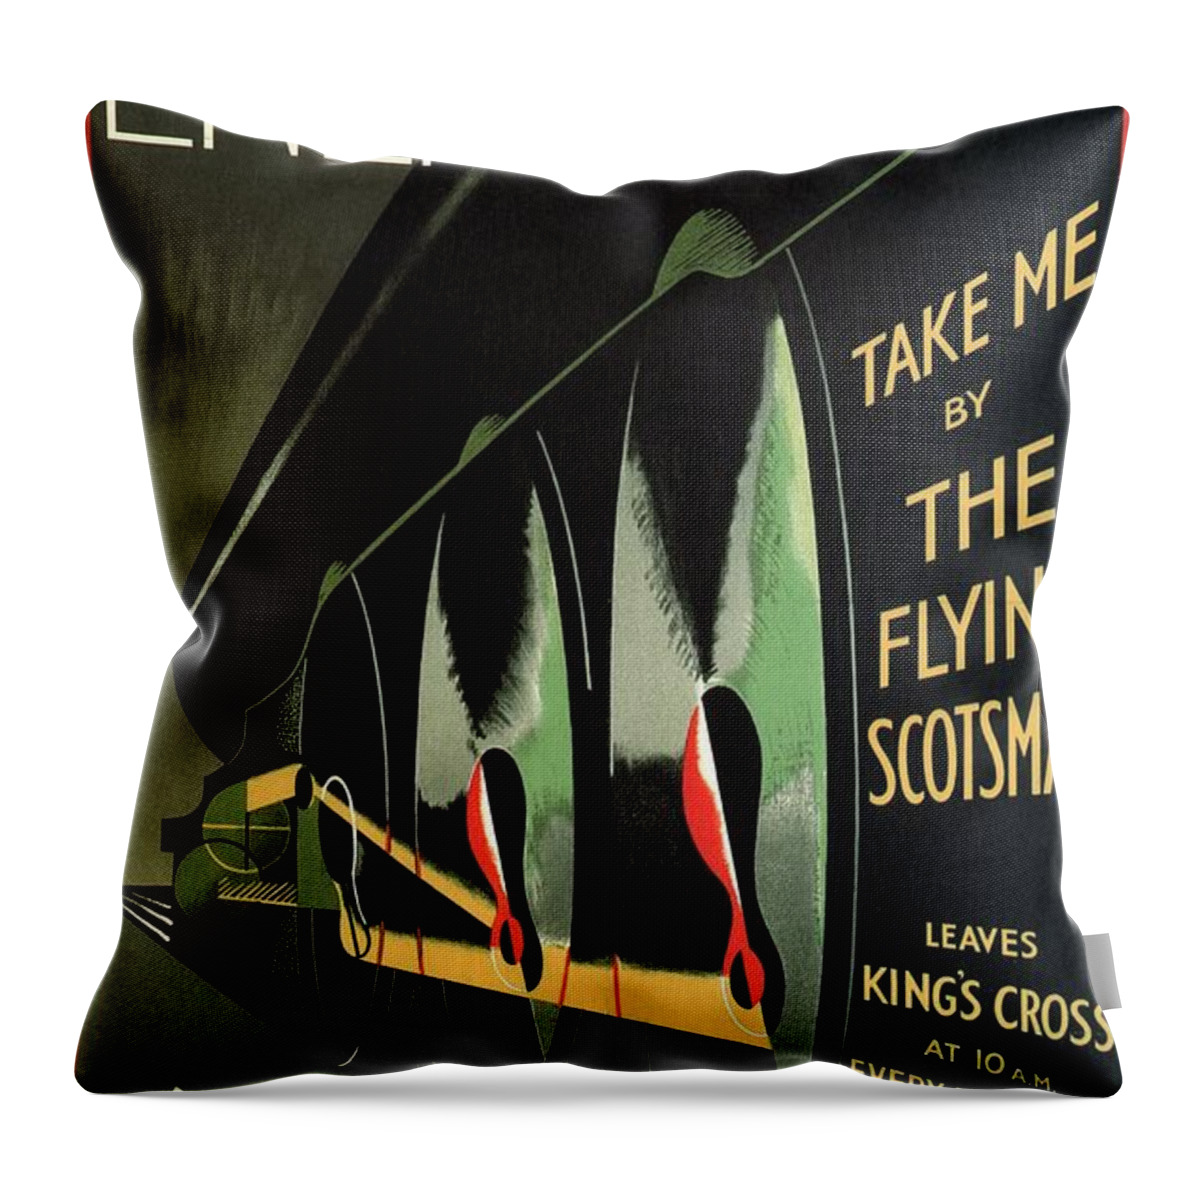 Lner Throw Pillow featuring the painting LNER - Flying Scotsman - King's Cross Railway Station - Art Deco - Vintage Advertising Poster by Studio Grafiikka